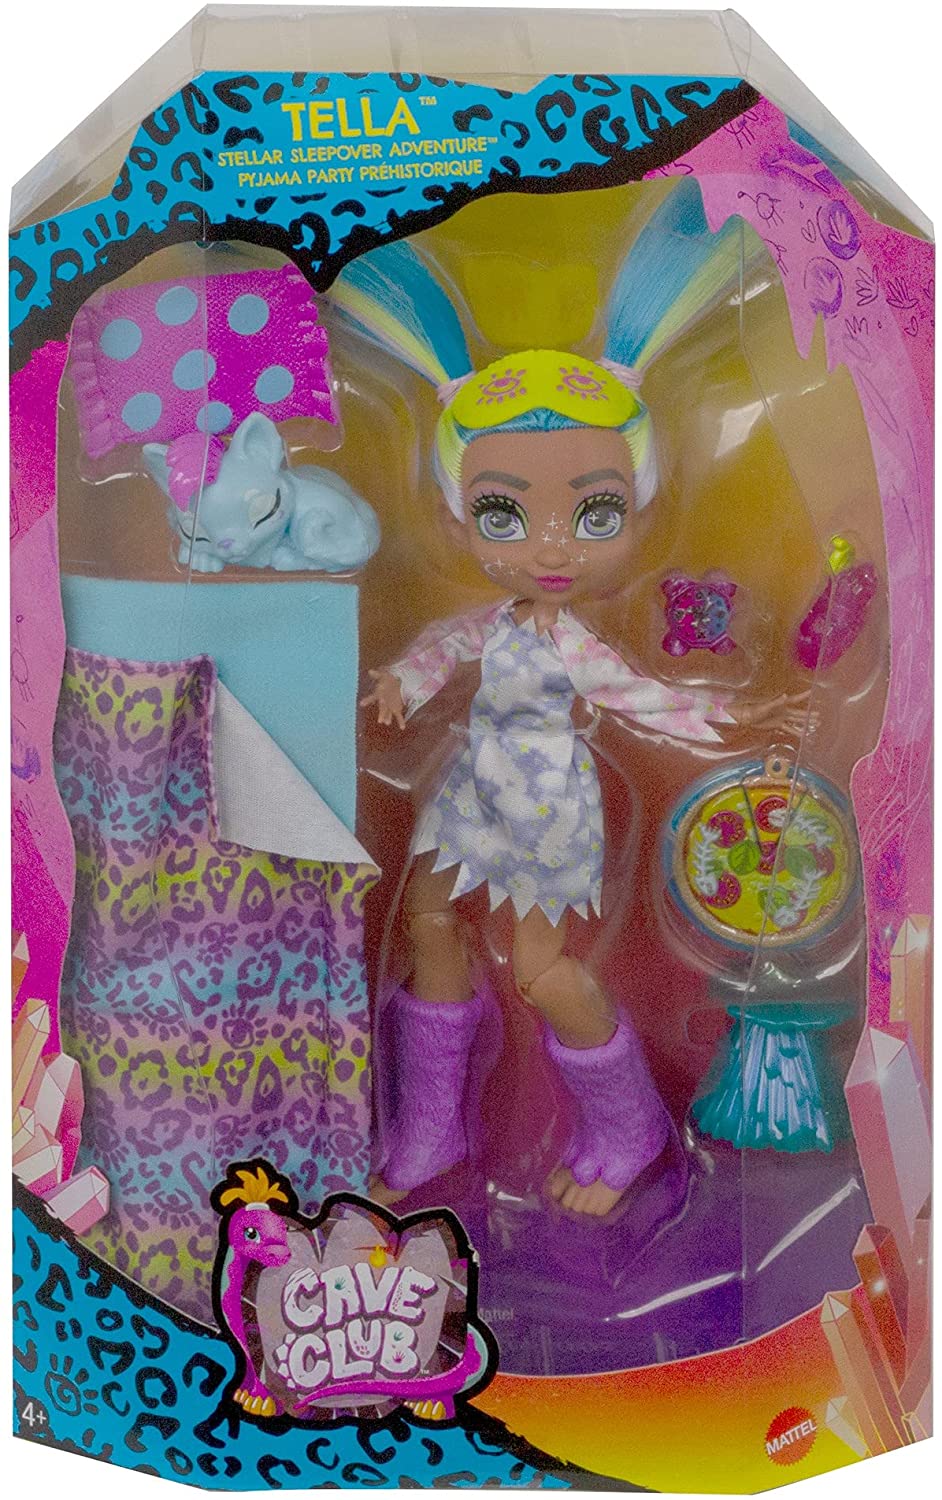 Cave Club Wild About Sleepovers Doll and Accessories